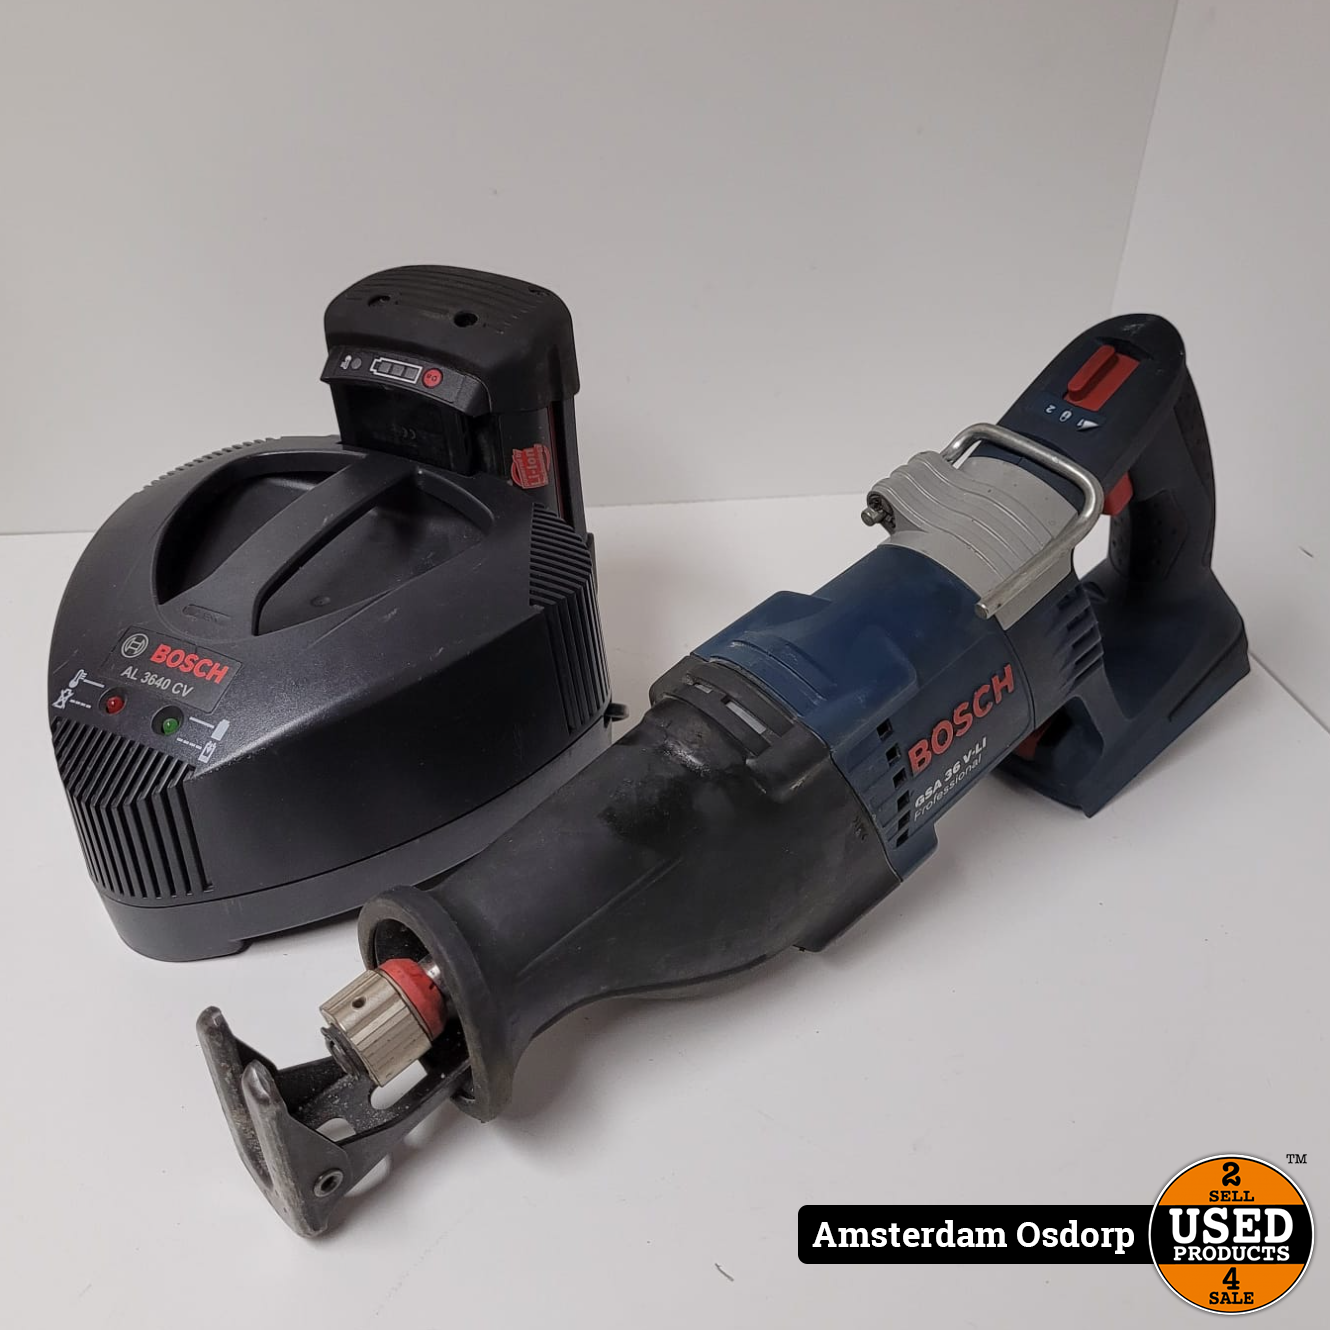 Moreel onderwijs rots inrichting bosch BOSCH GSA 36 reciprozaag + 36V accu + lader| in nette staat - Used  Products Osdorp